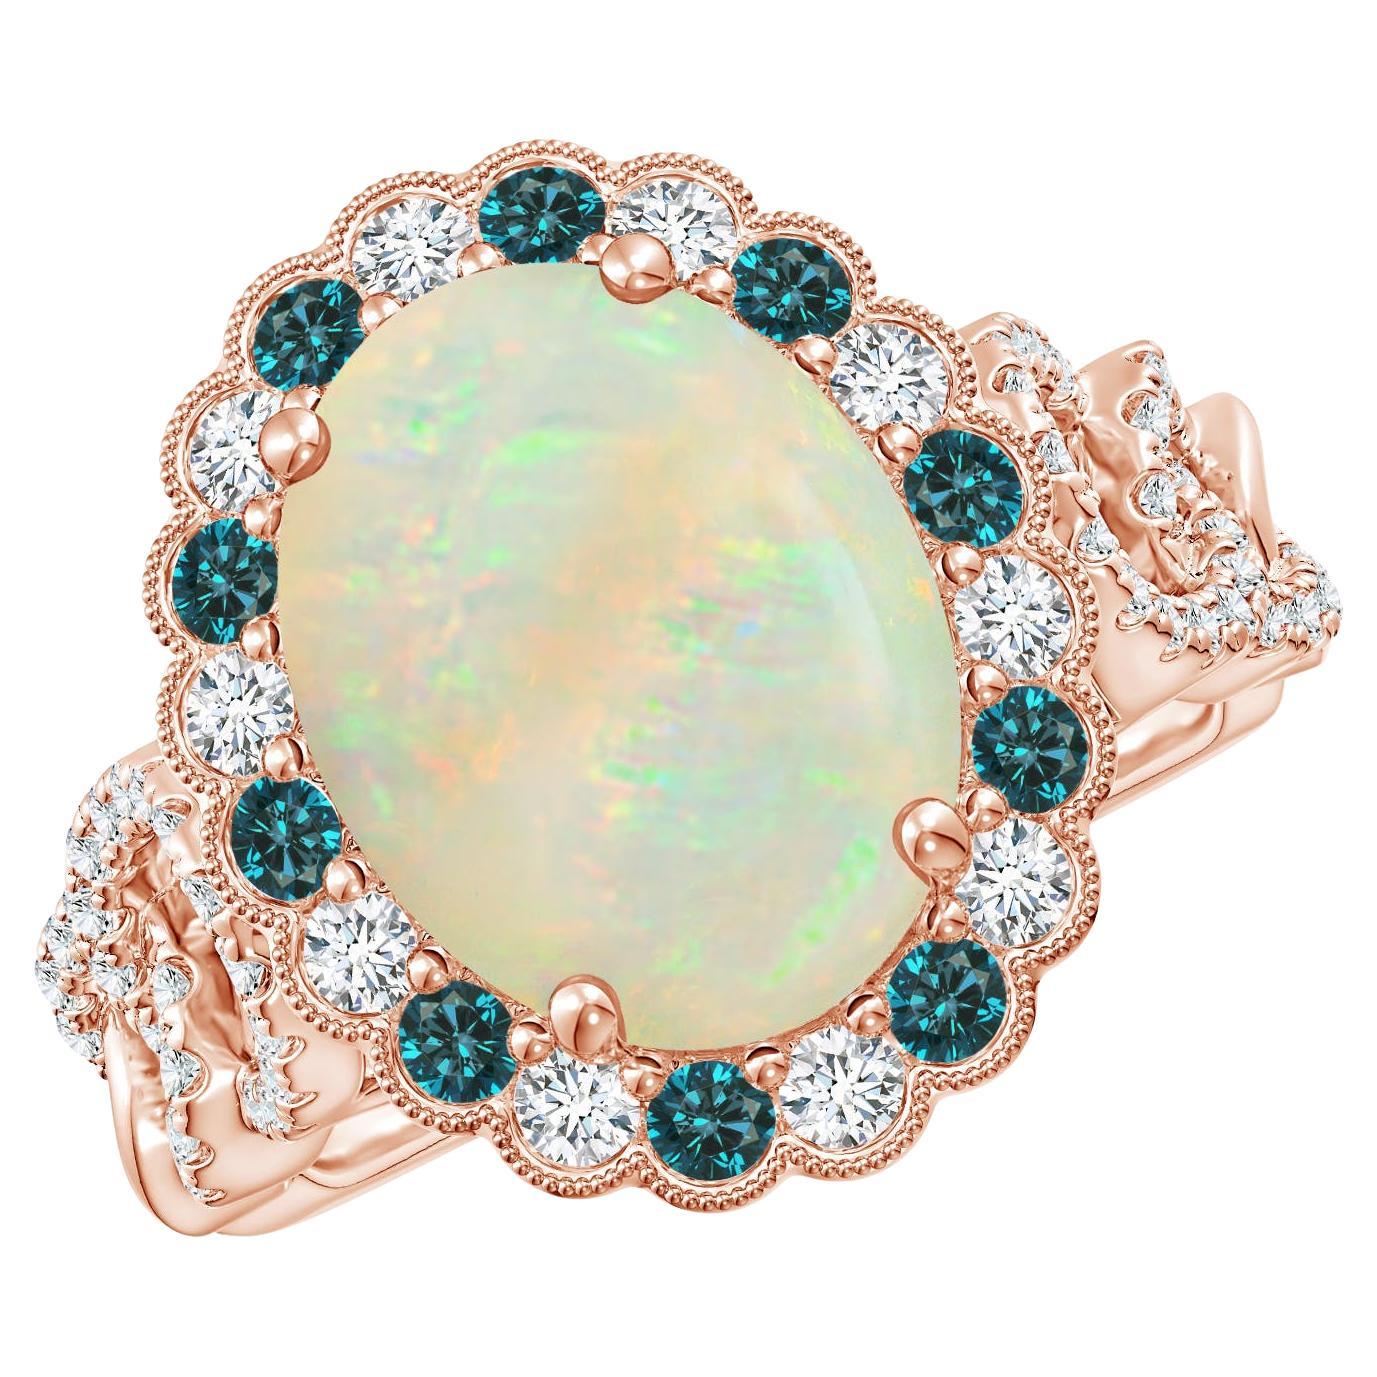 For Sale:  Angara Gia Certified Natural Opal Ring in Rose Gold with Blue & White Diamonds